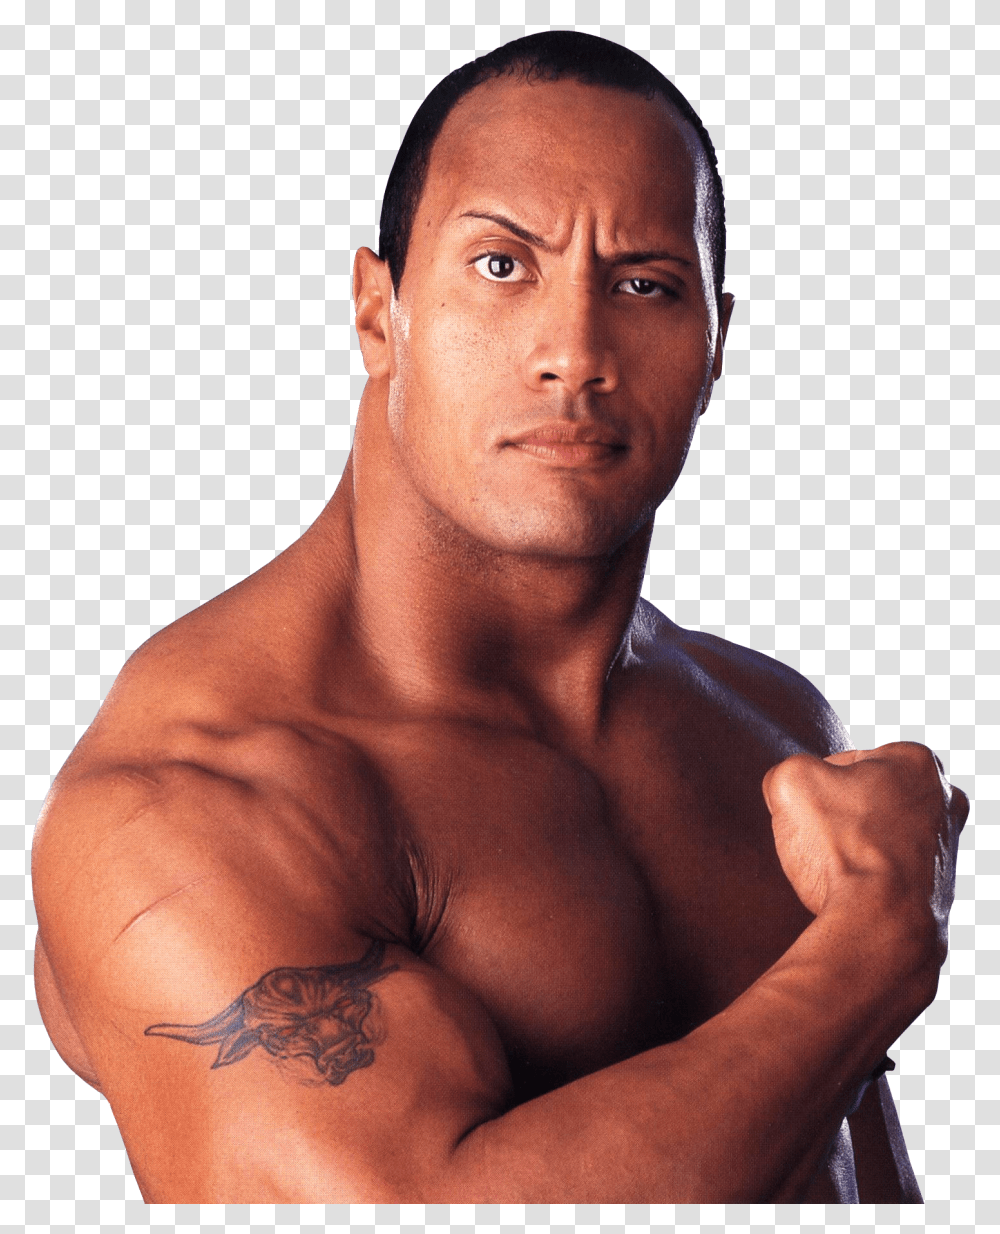 Download The Rock Image Dwayne Johnson Looks Like The Rock, Skin, Person, Human, Tattoo Transparent Png